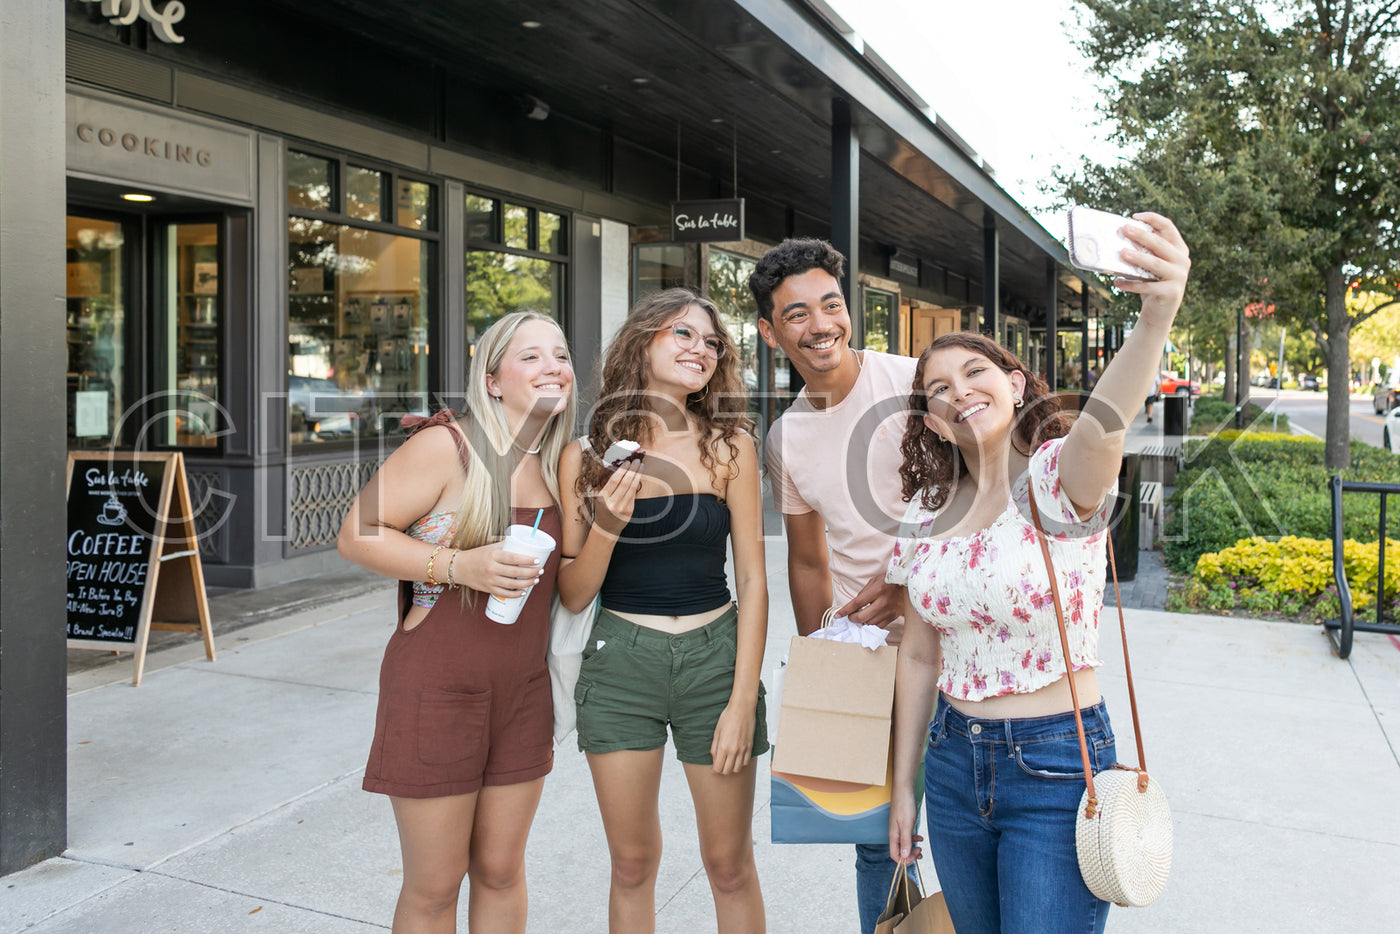 Group of four friends taking a selfie in front of a Tampa coffee shop